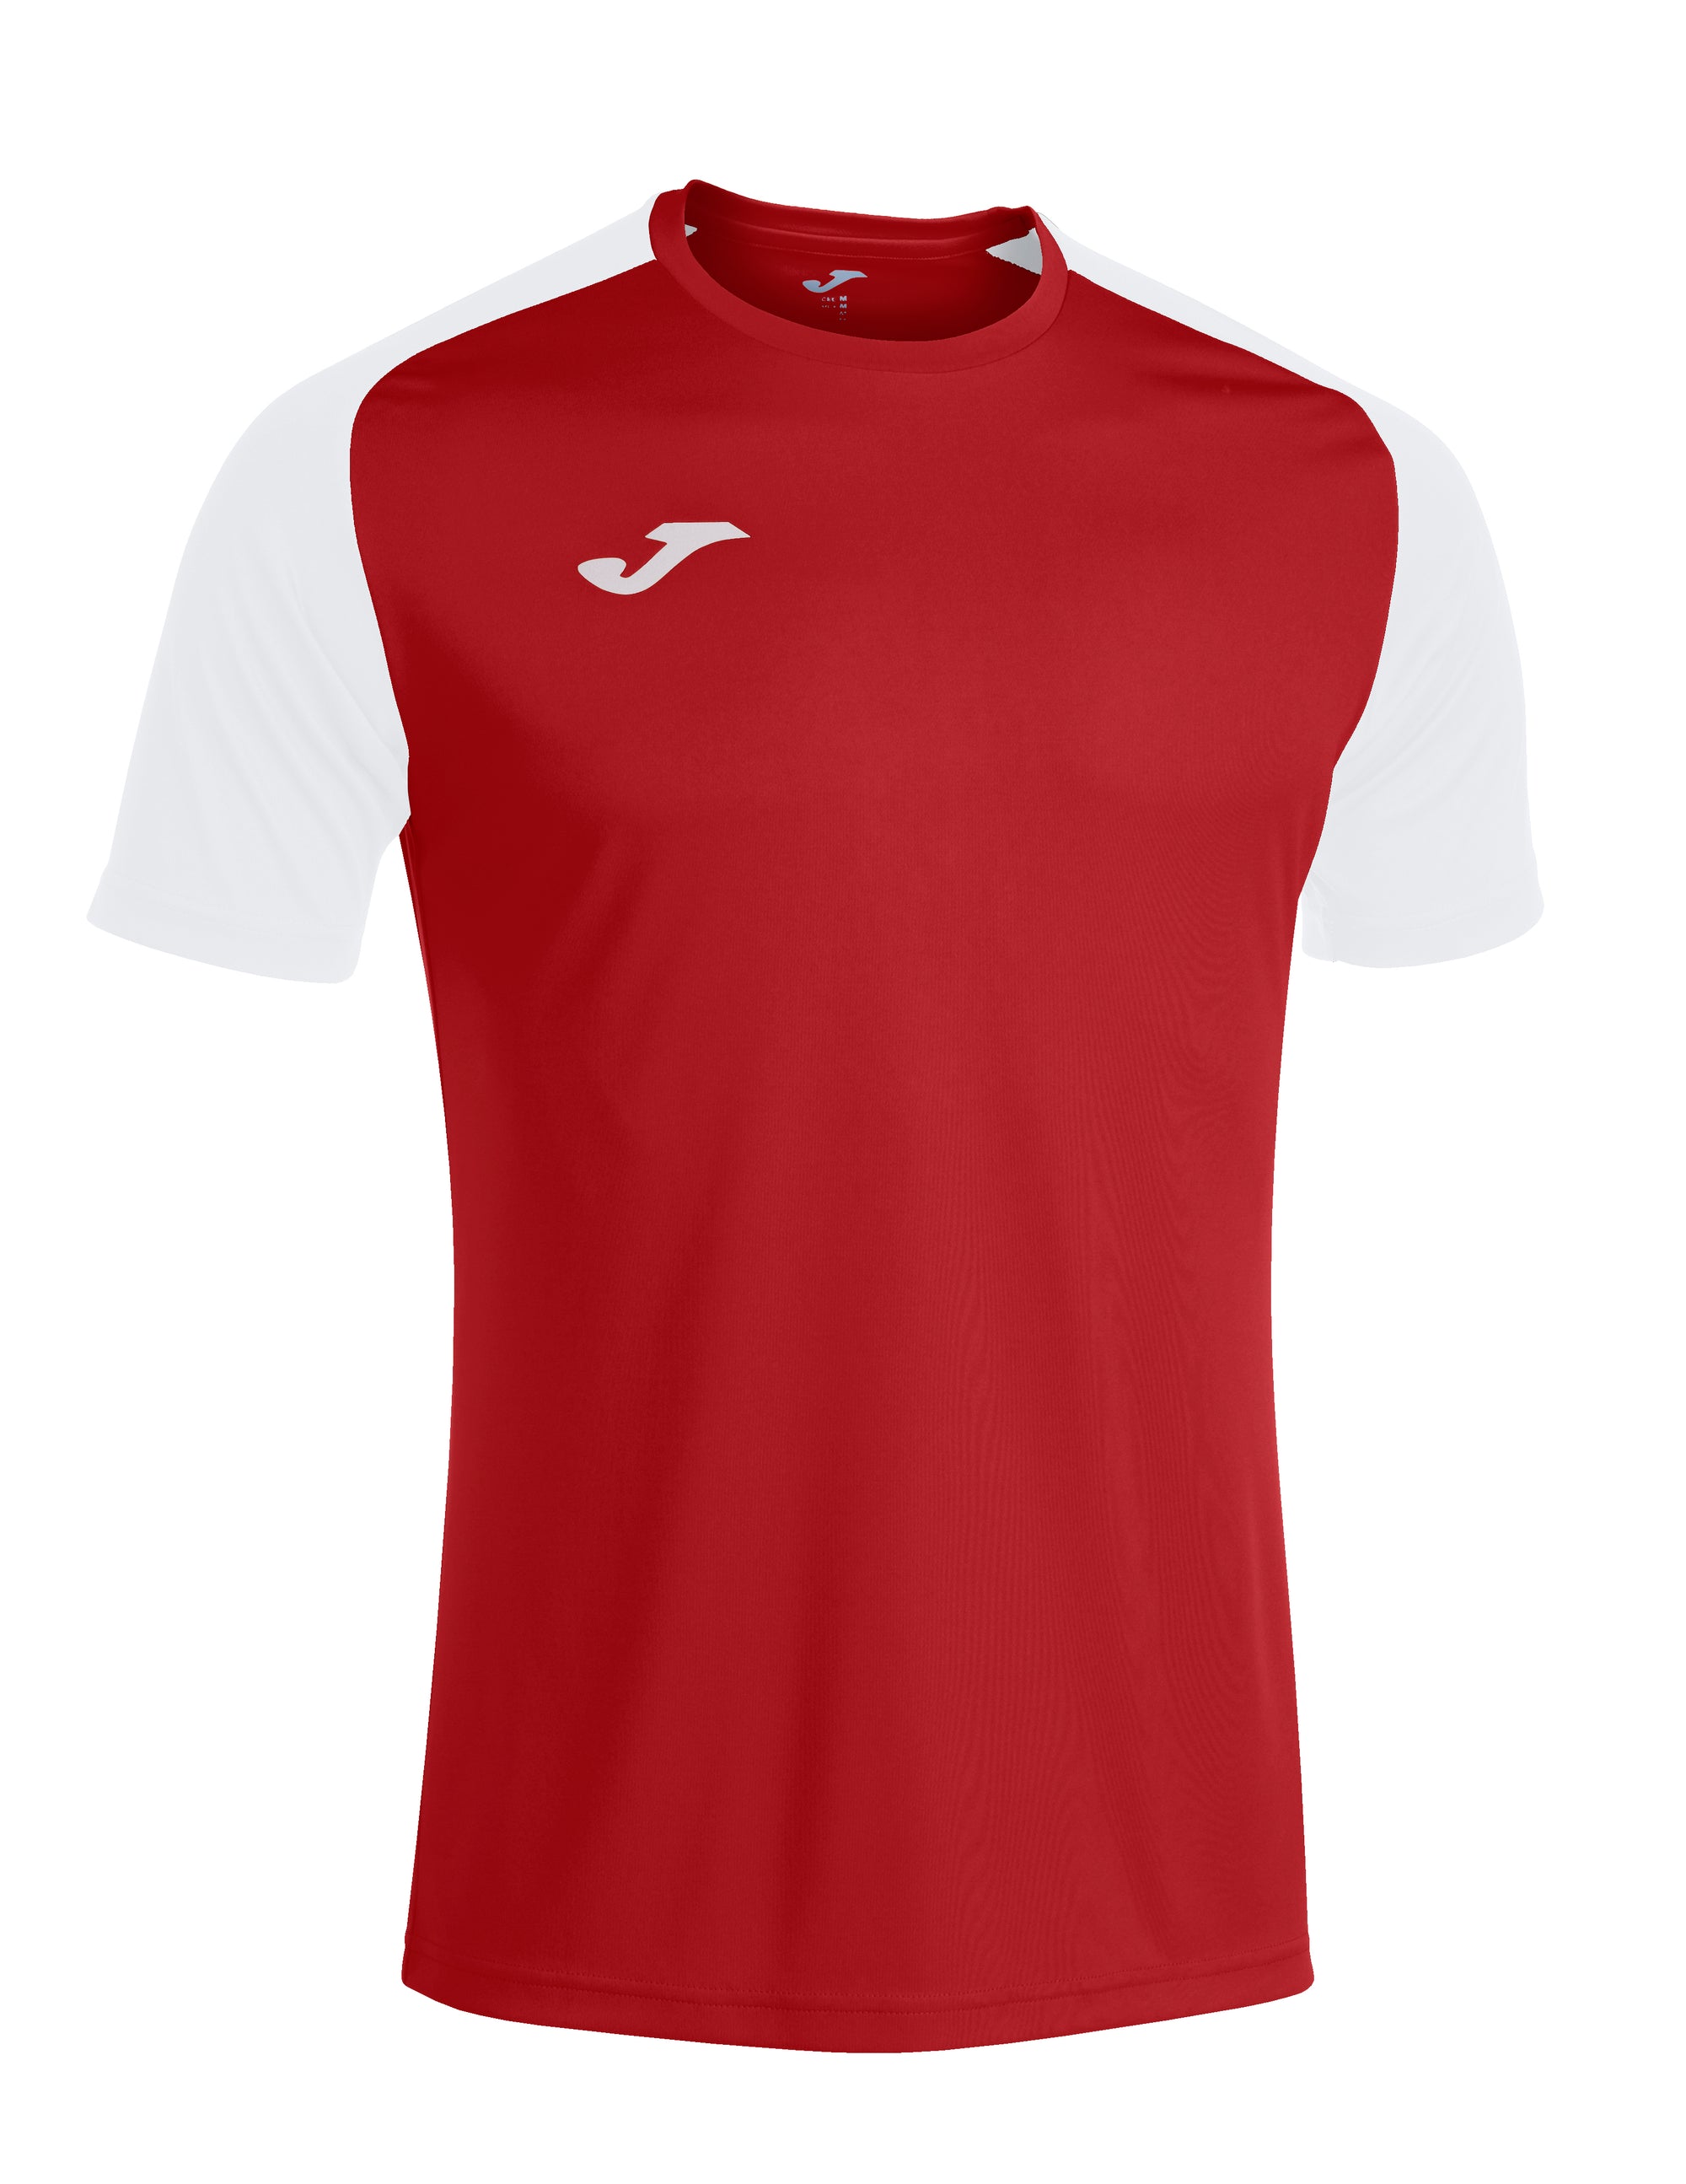 Joma Academy IV Short Sleeved T-Shirt - Red/White